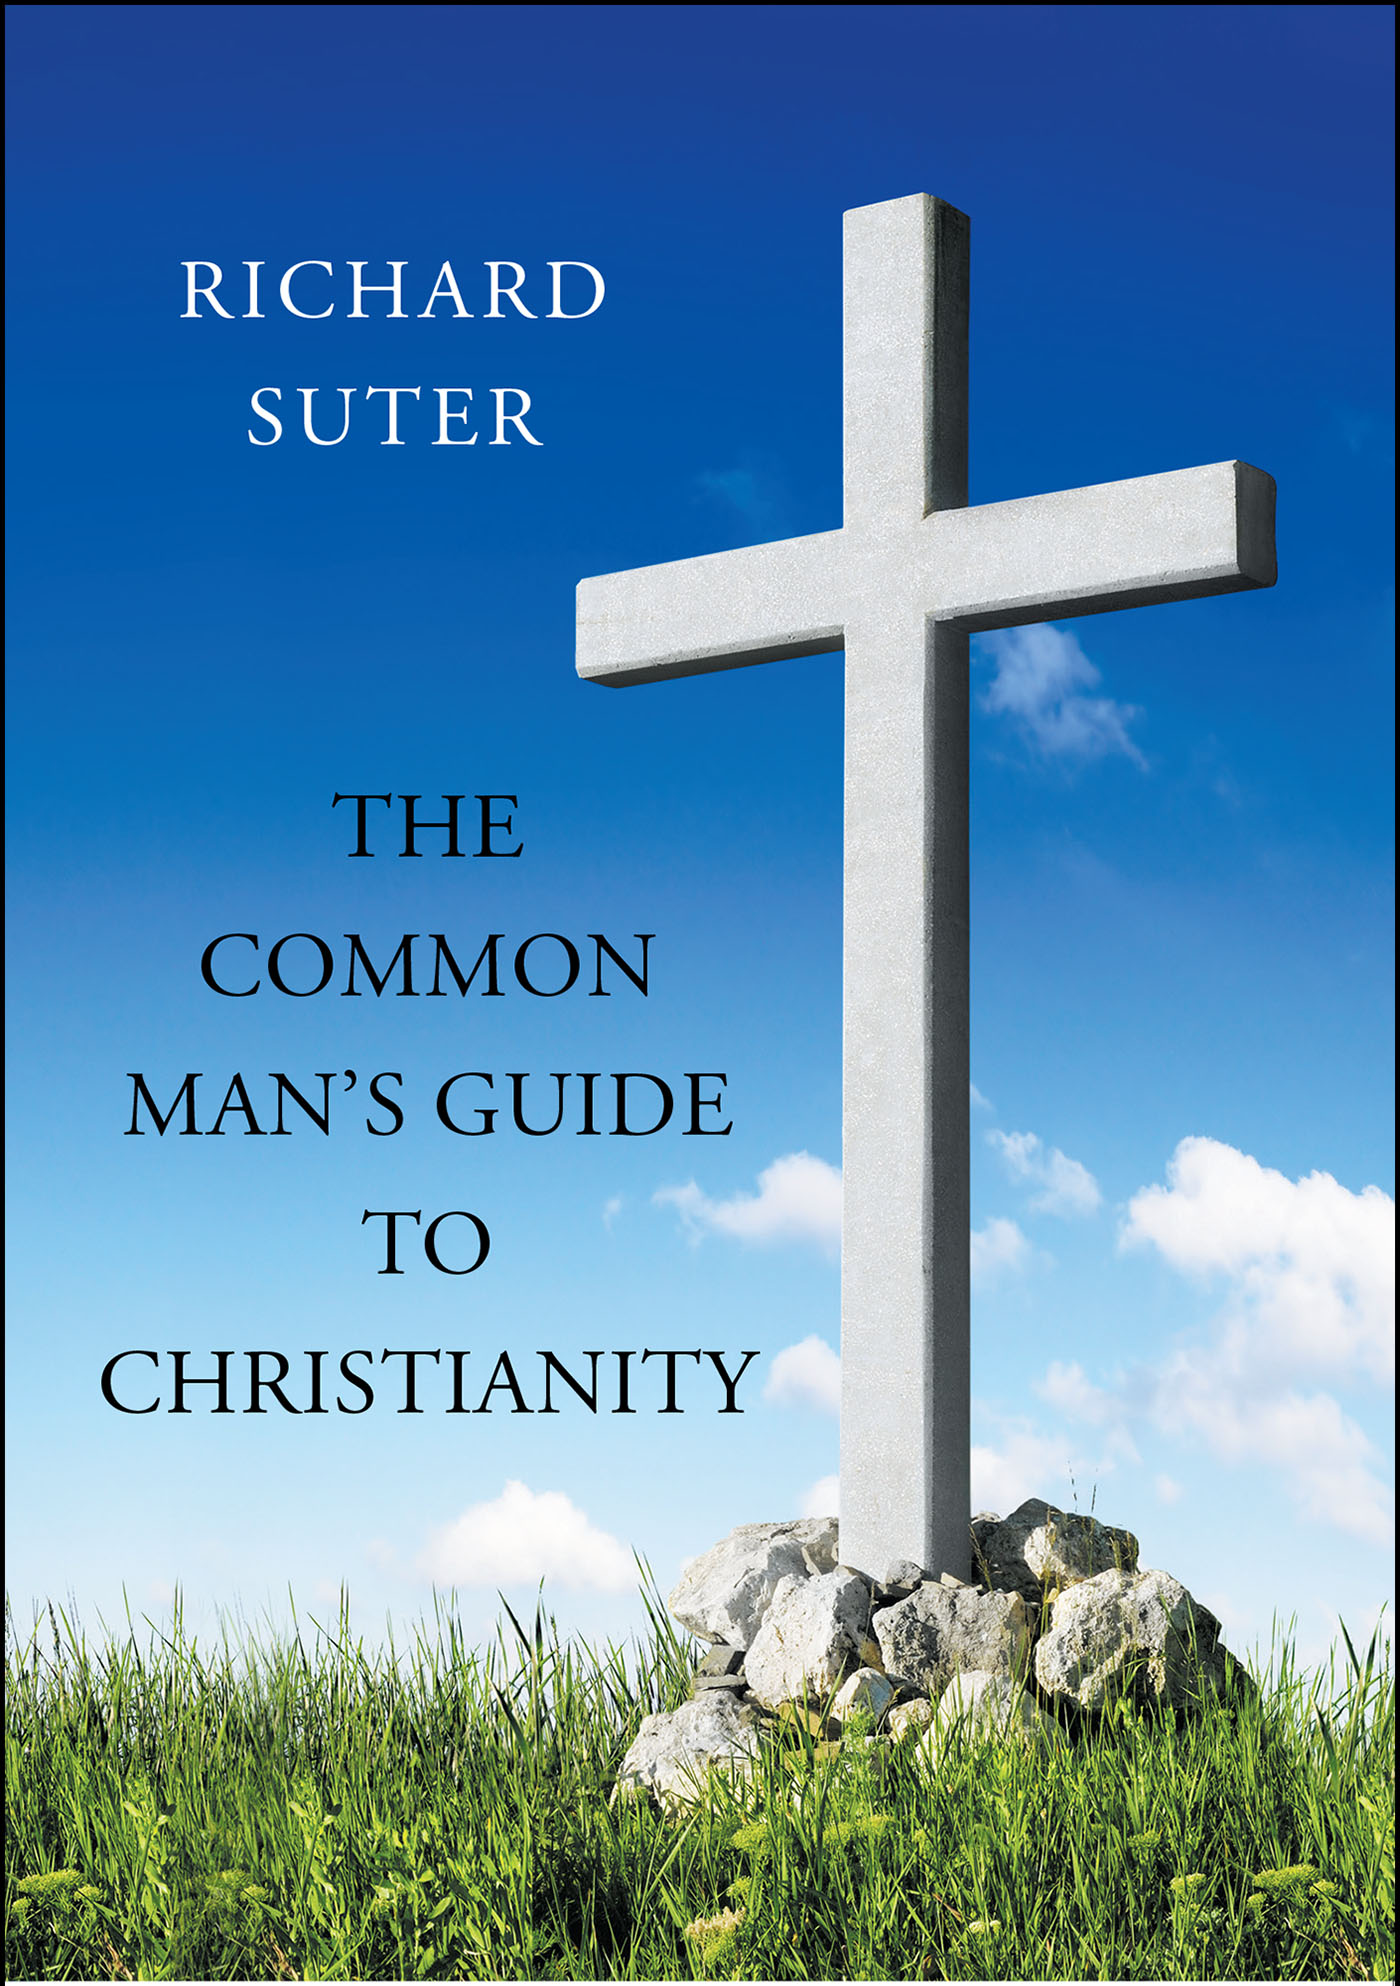 Author Richard Suter’s New Book, "The Common Man's Guide to Christianity," is an Excellent Roadmap for Those Who Have an Interest in Becoming a Born-Again Christian